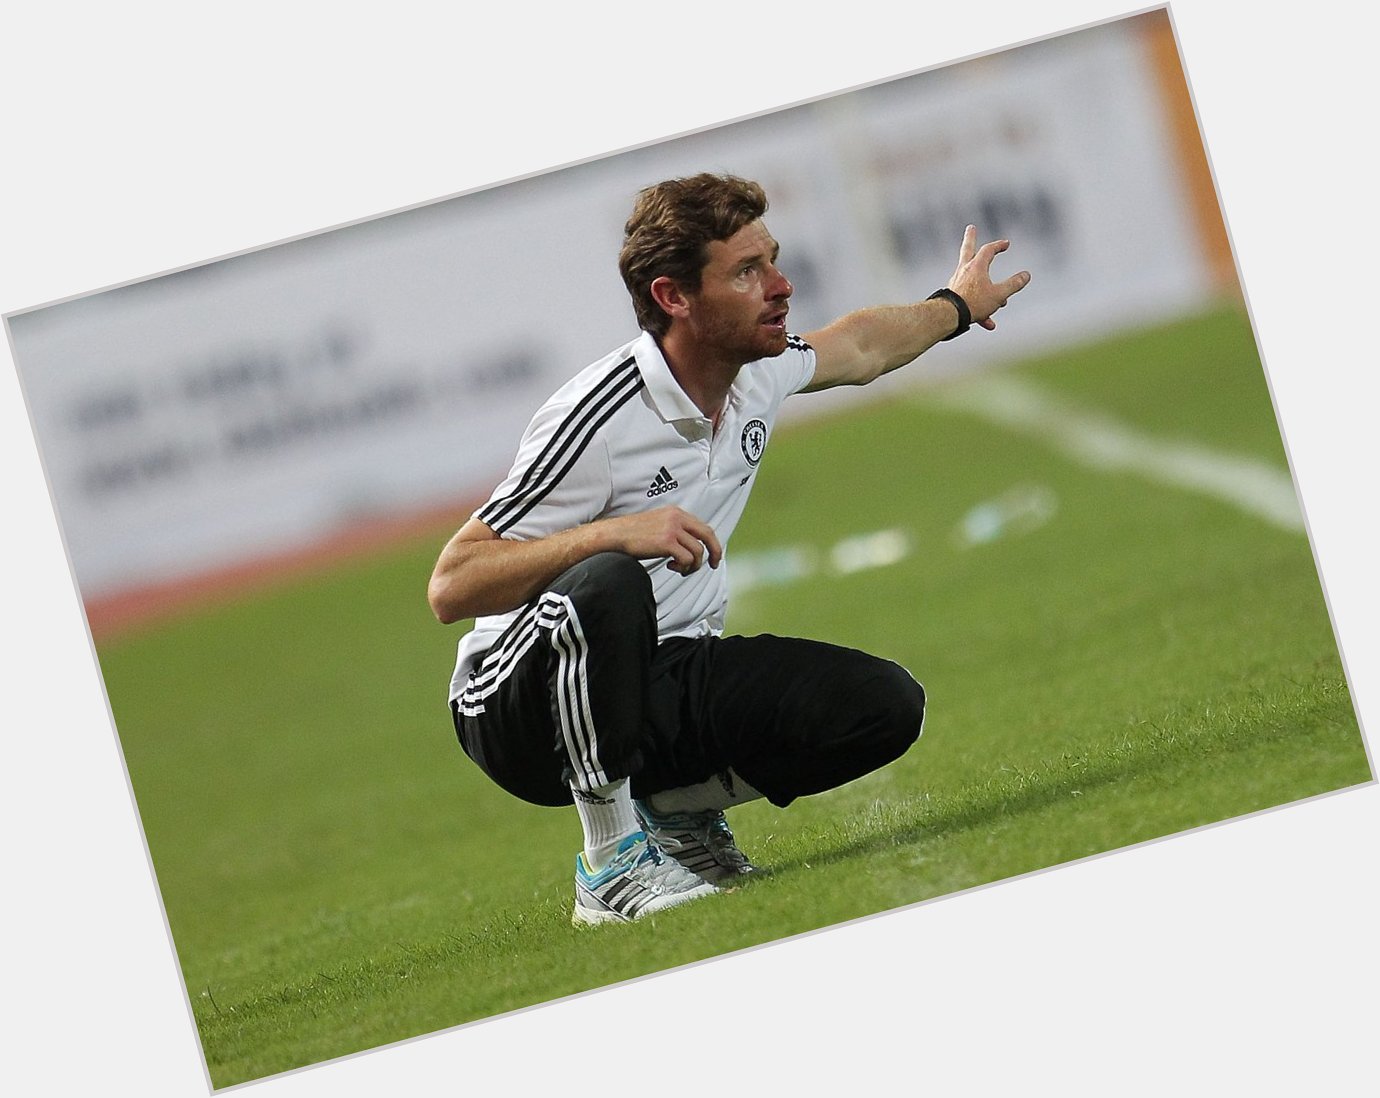  Happy 42nd birthday to Marseille manager Andre Villas-Boas!

The most iconic managerial pose in the game? 